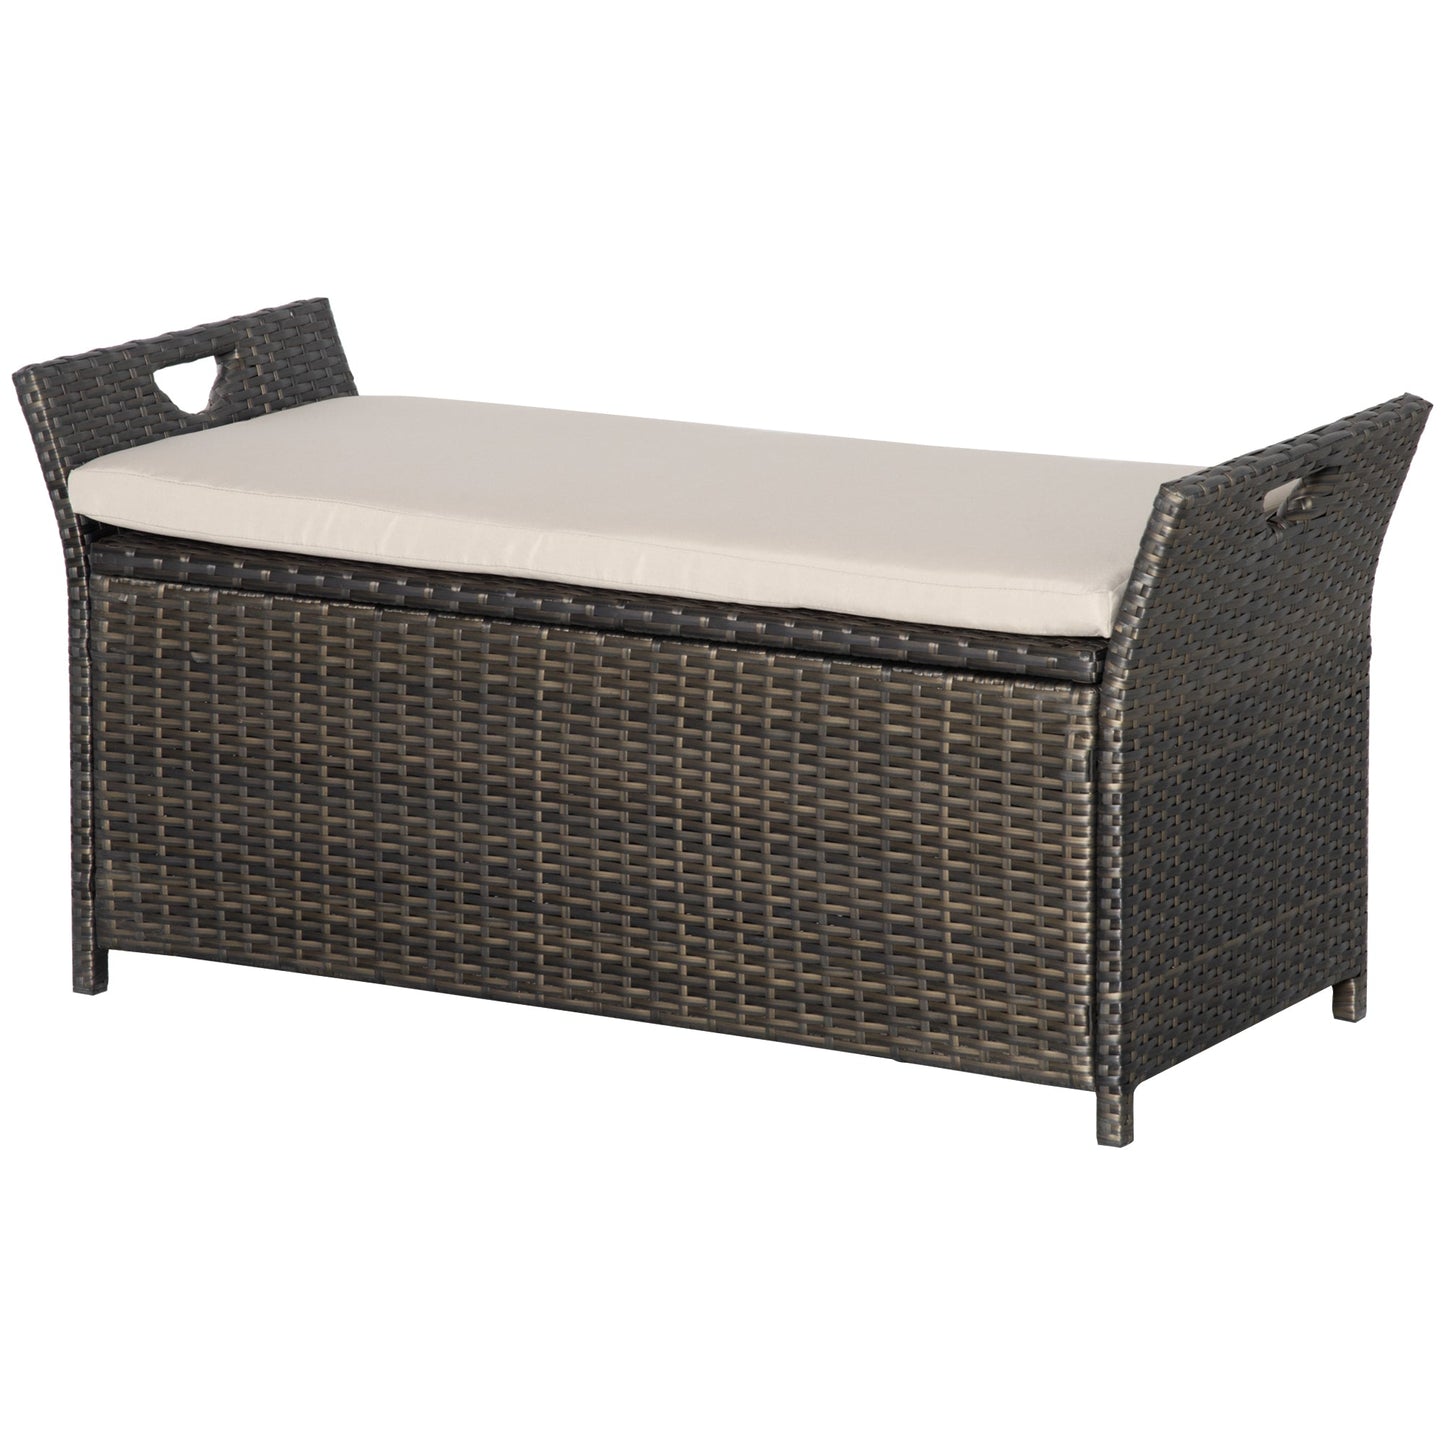 2-In-1 Outdoor PE Rattan Storage Bench, 27 Gallon Patio Wicker Furniture, Basket Box with Handles and Cushion Cream at Gallery Canada